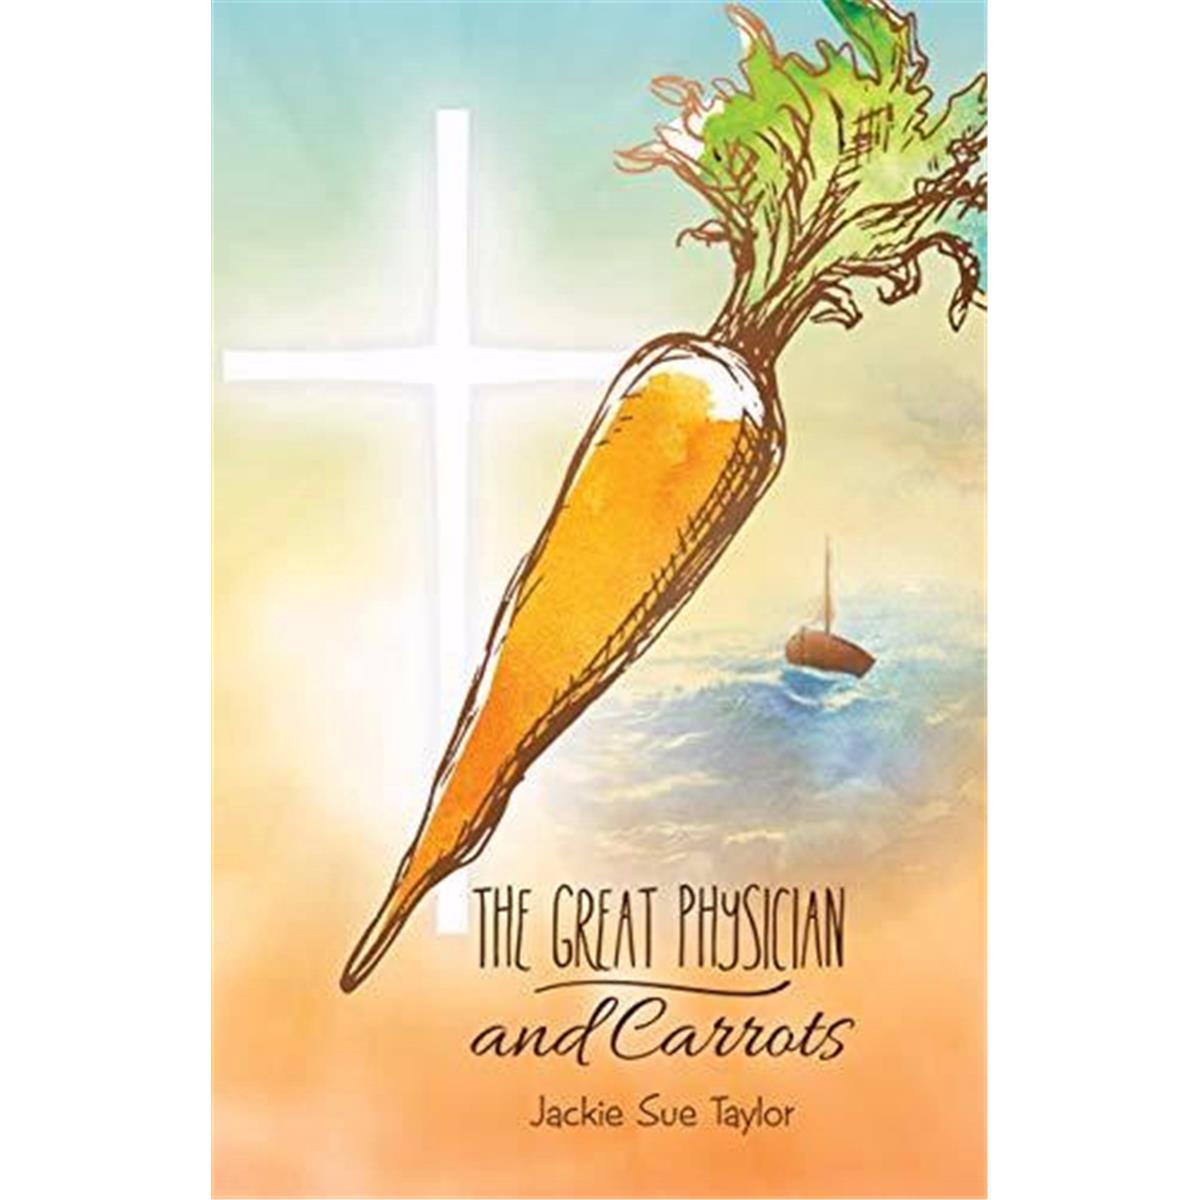 Carpenters Son 148849 The Great Physician & Carrots